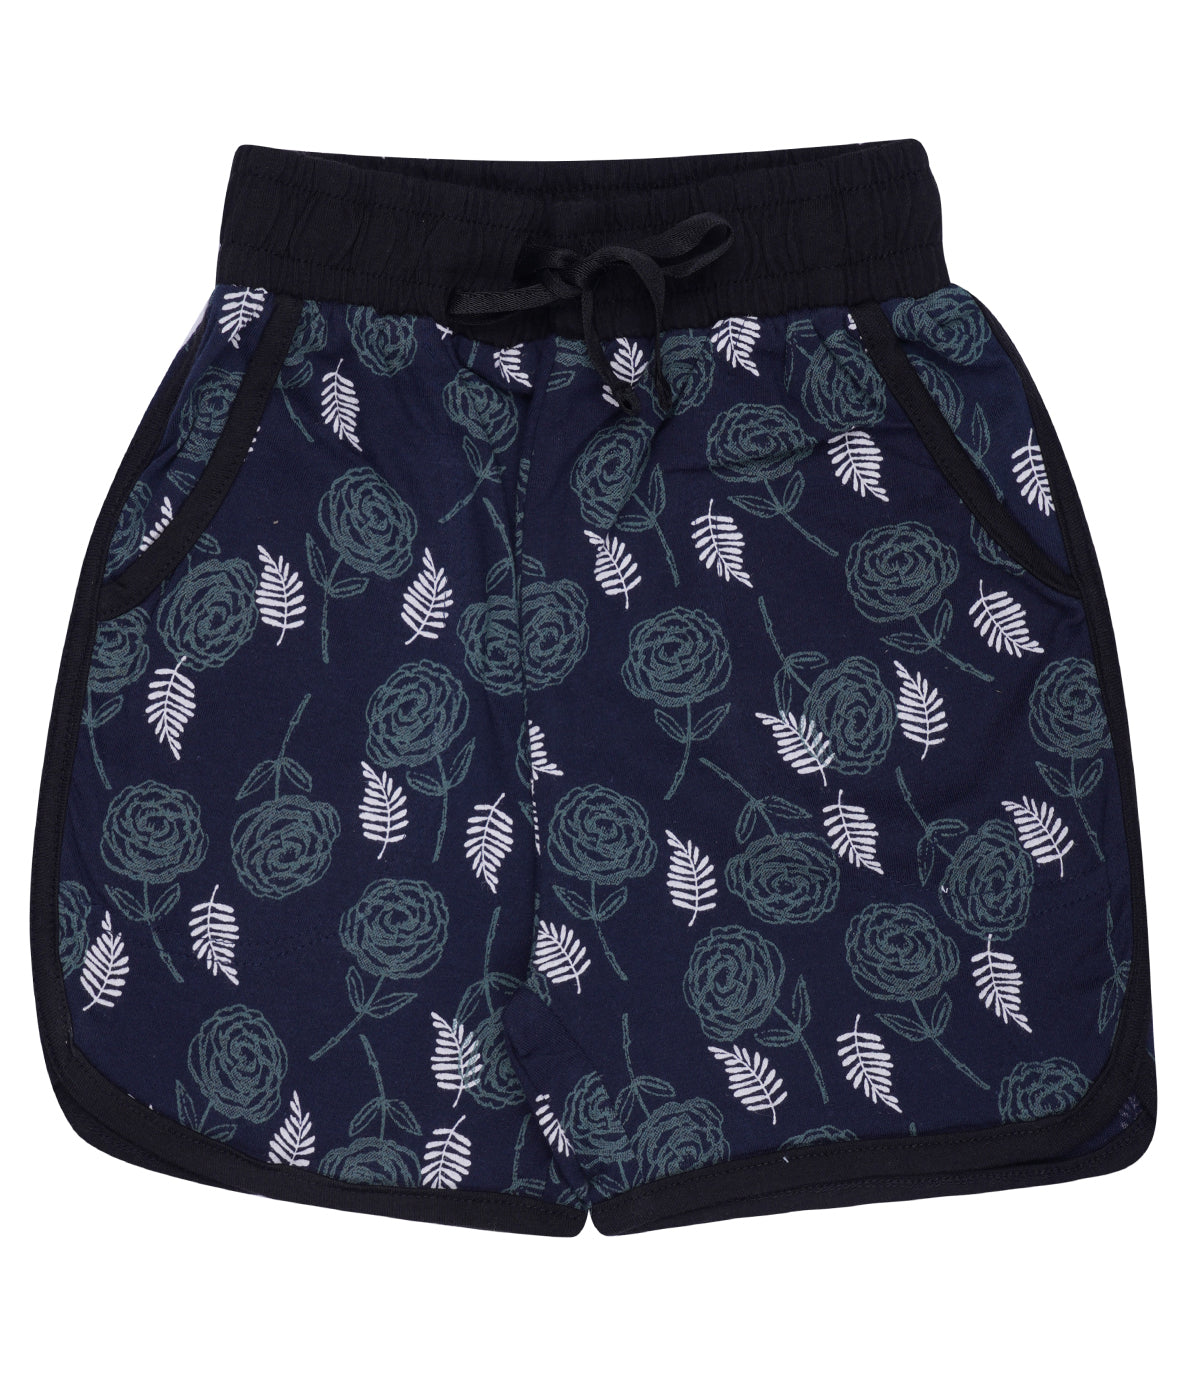 Yalzz Short For Boys Casual Printed Pure Cotton Dark Blue Pack of 1